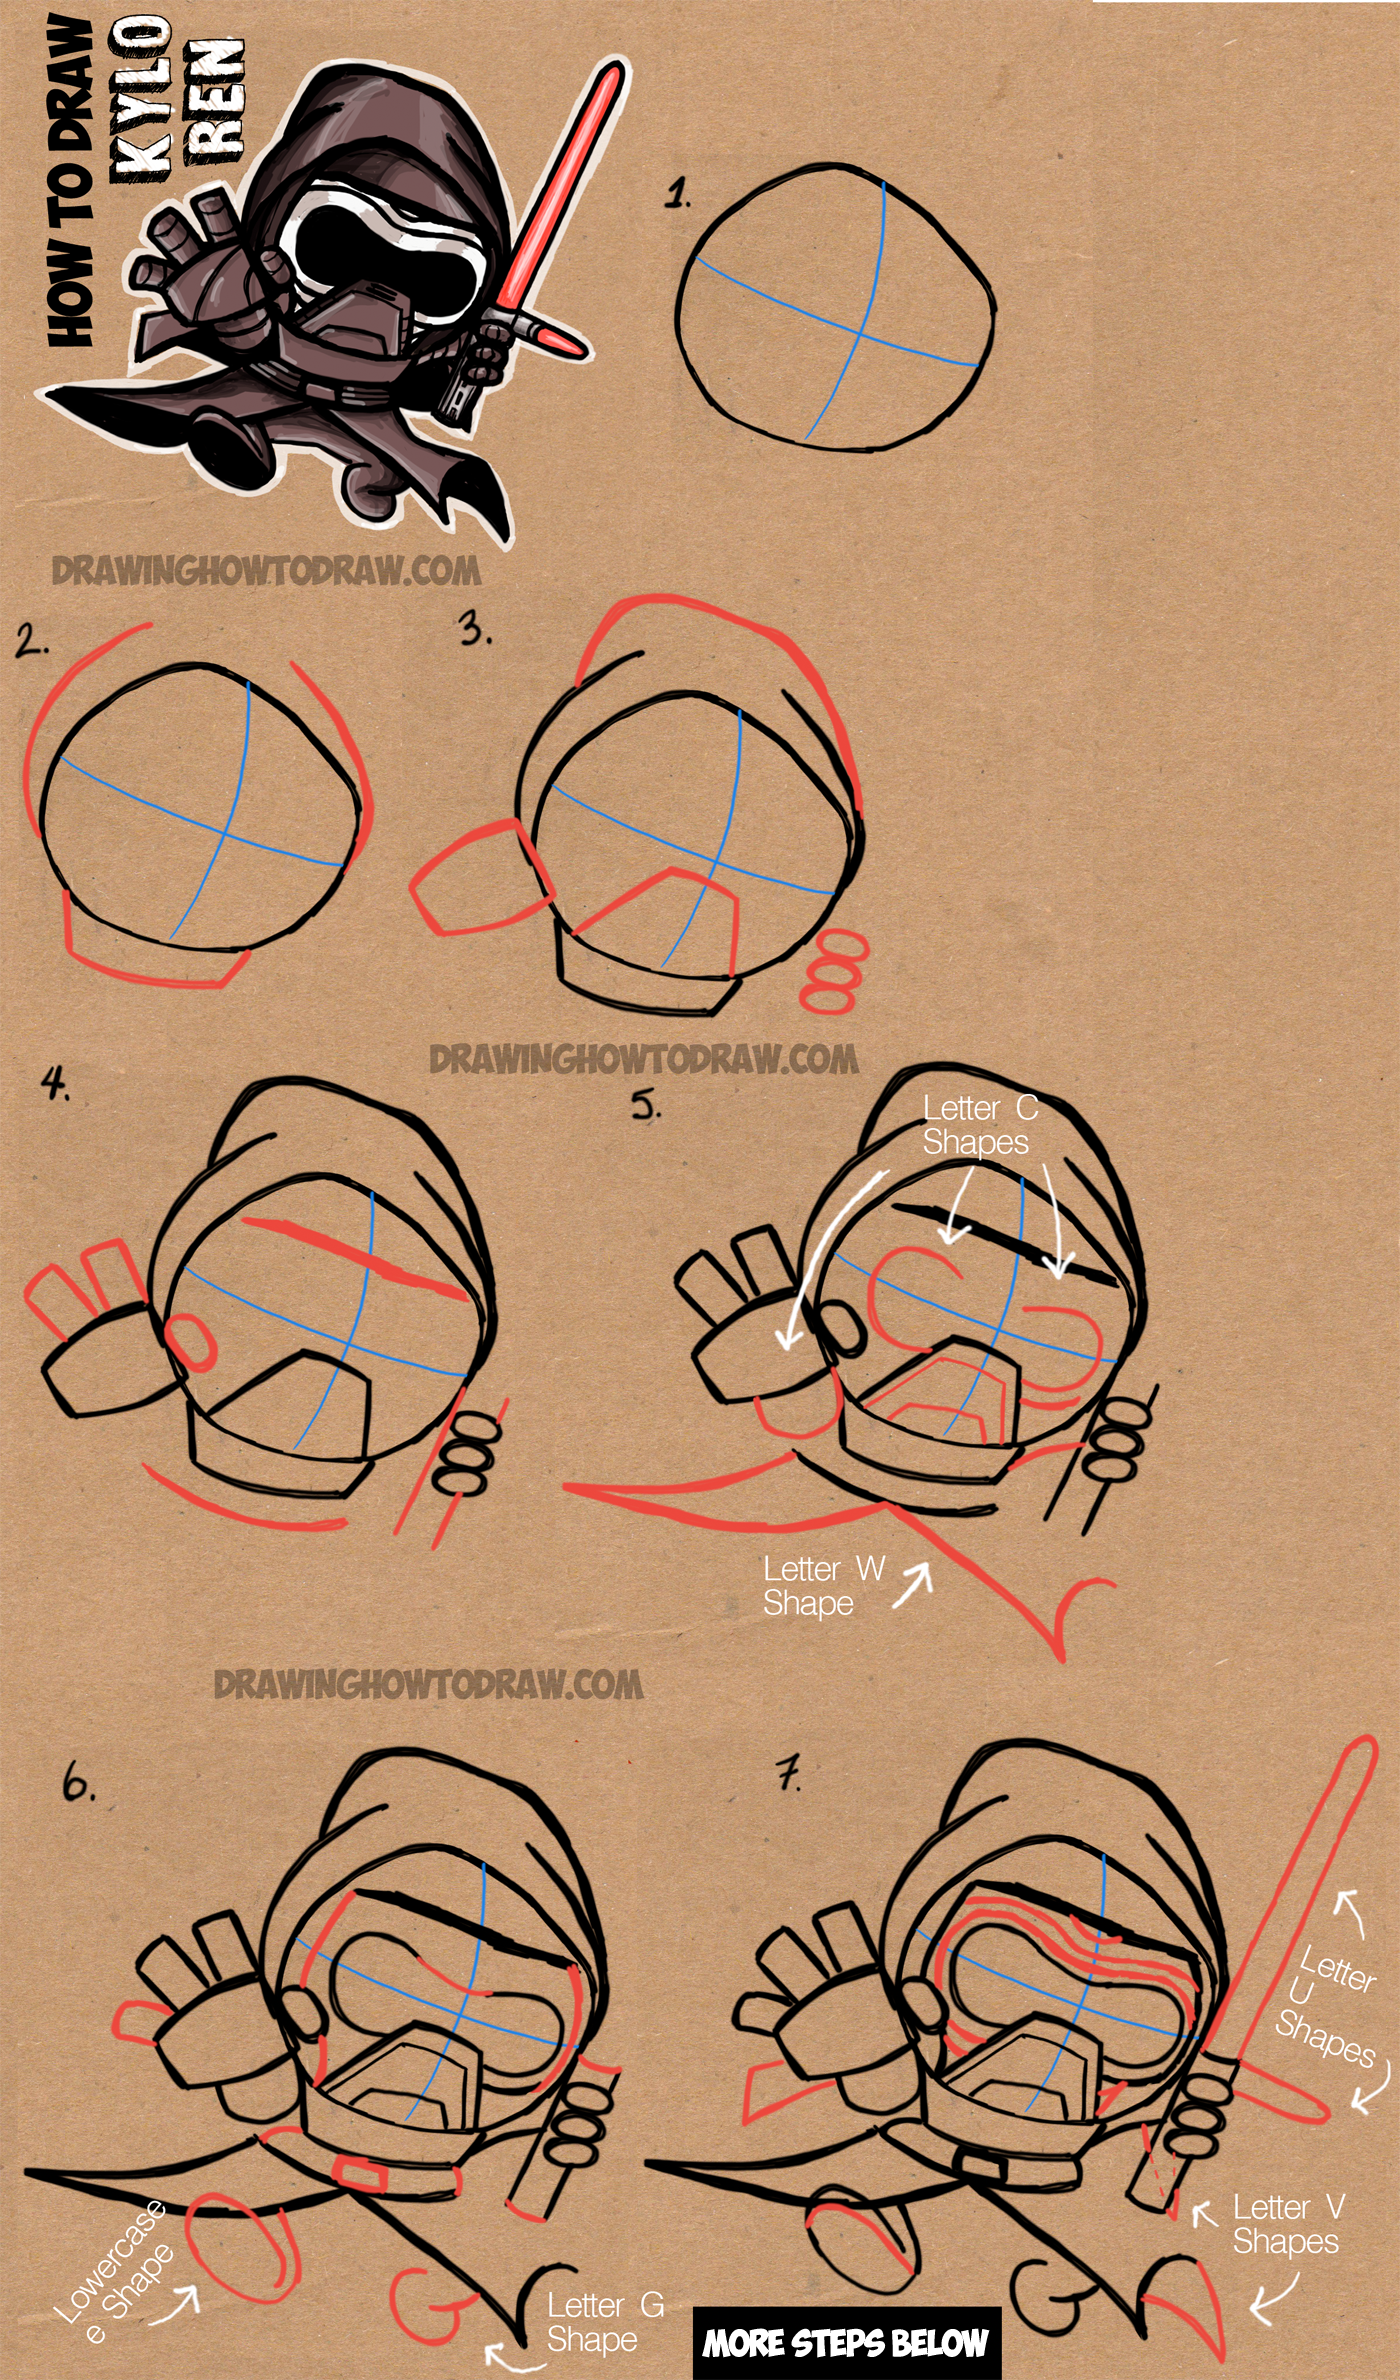 How to Draw Cute Chibi Cartoon Kylo Ren from Star Wars The Force Awakens - Step by Step Drawing Tutorial